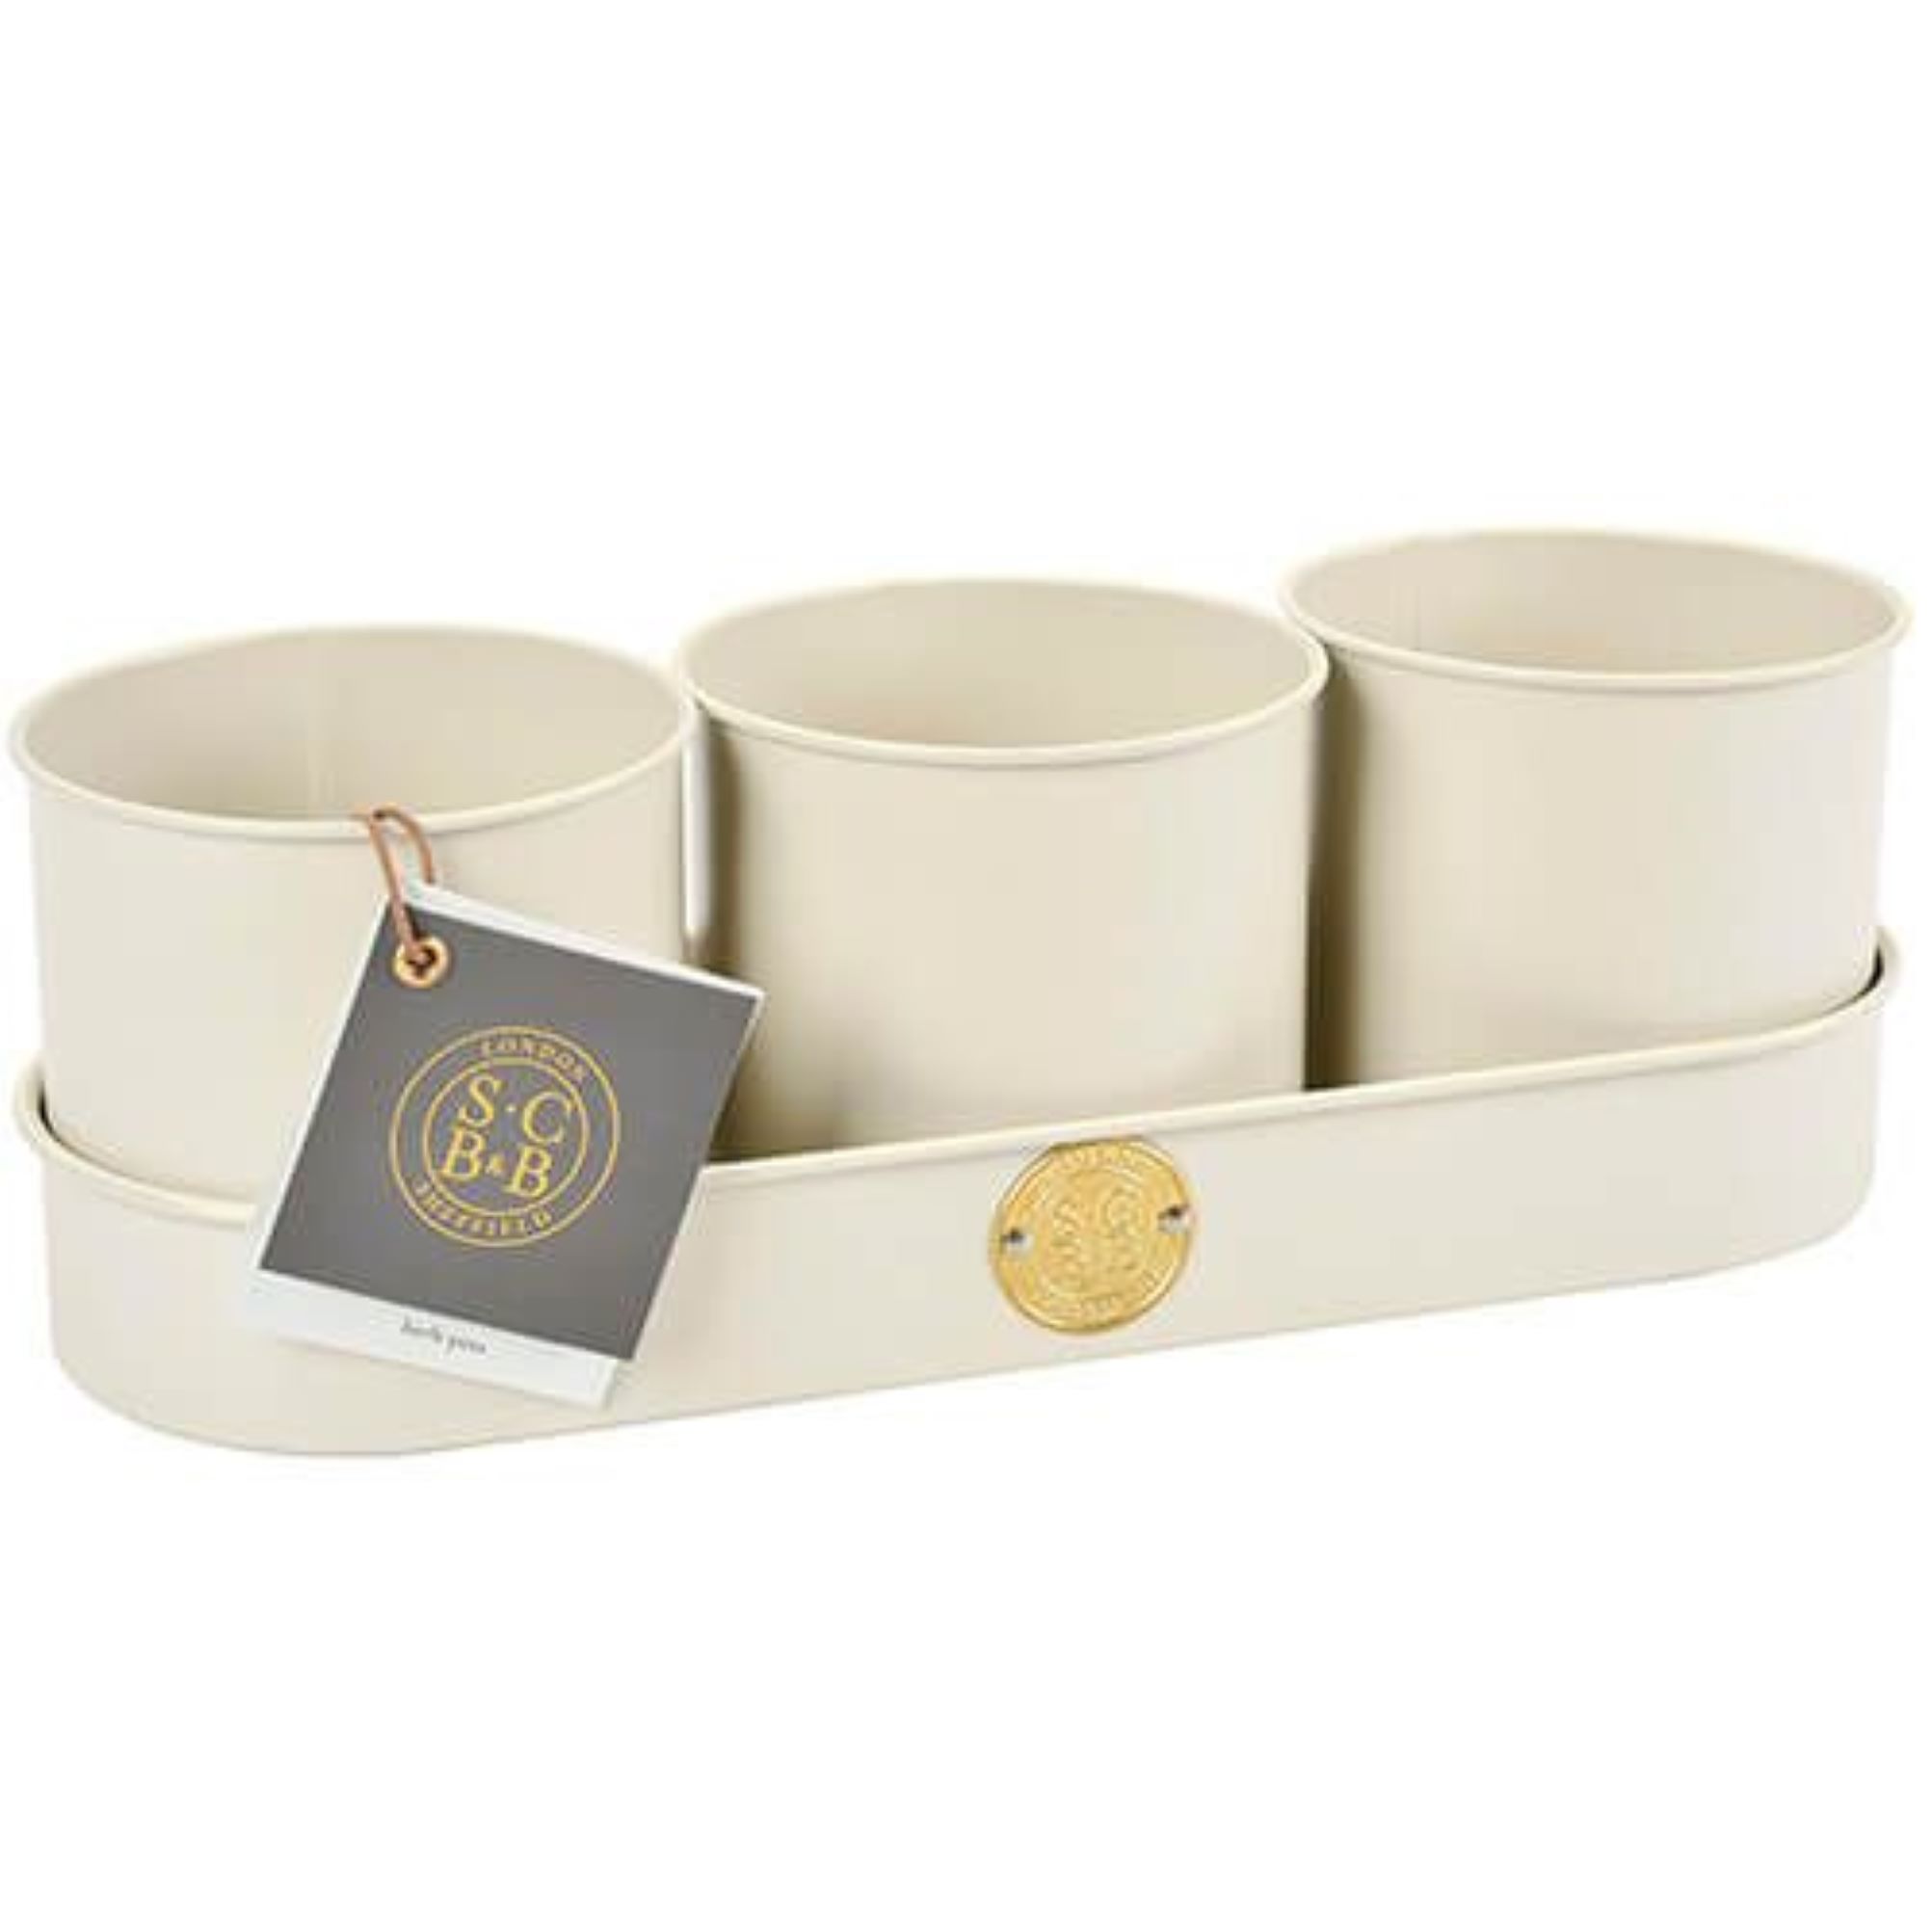 Burgon & Ball Set of 3 Sophie Conran Herb Pots with Tray